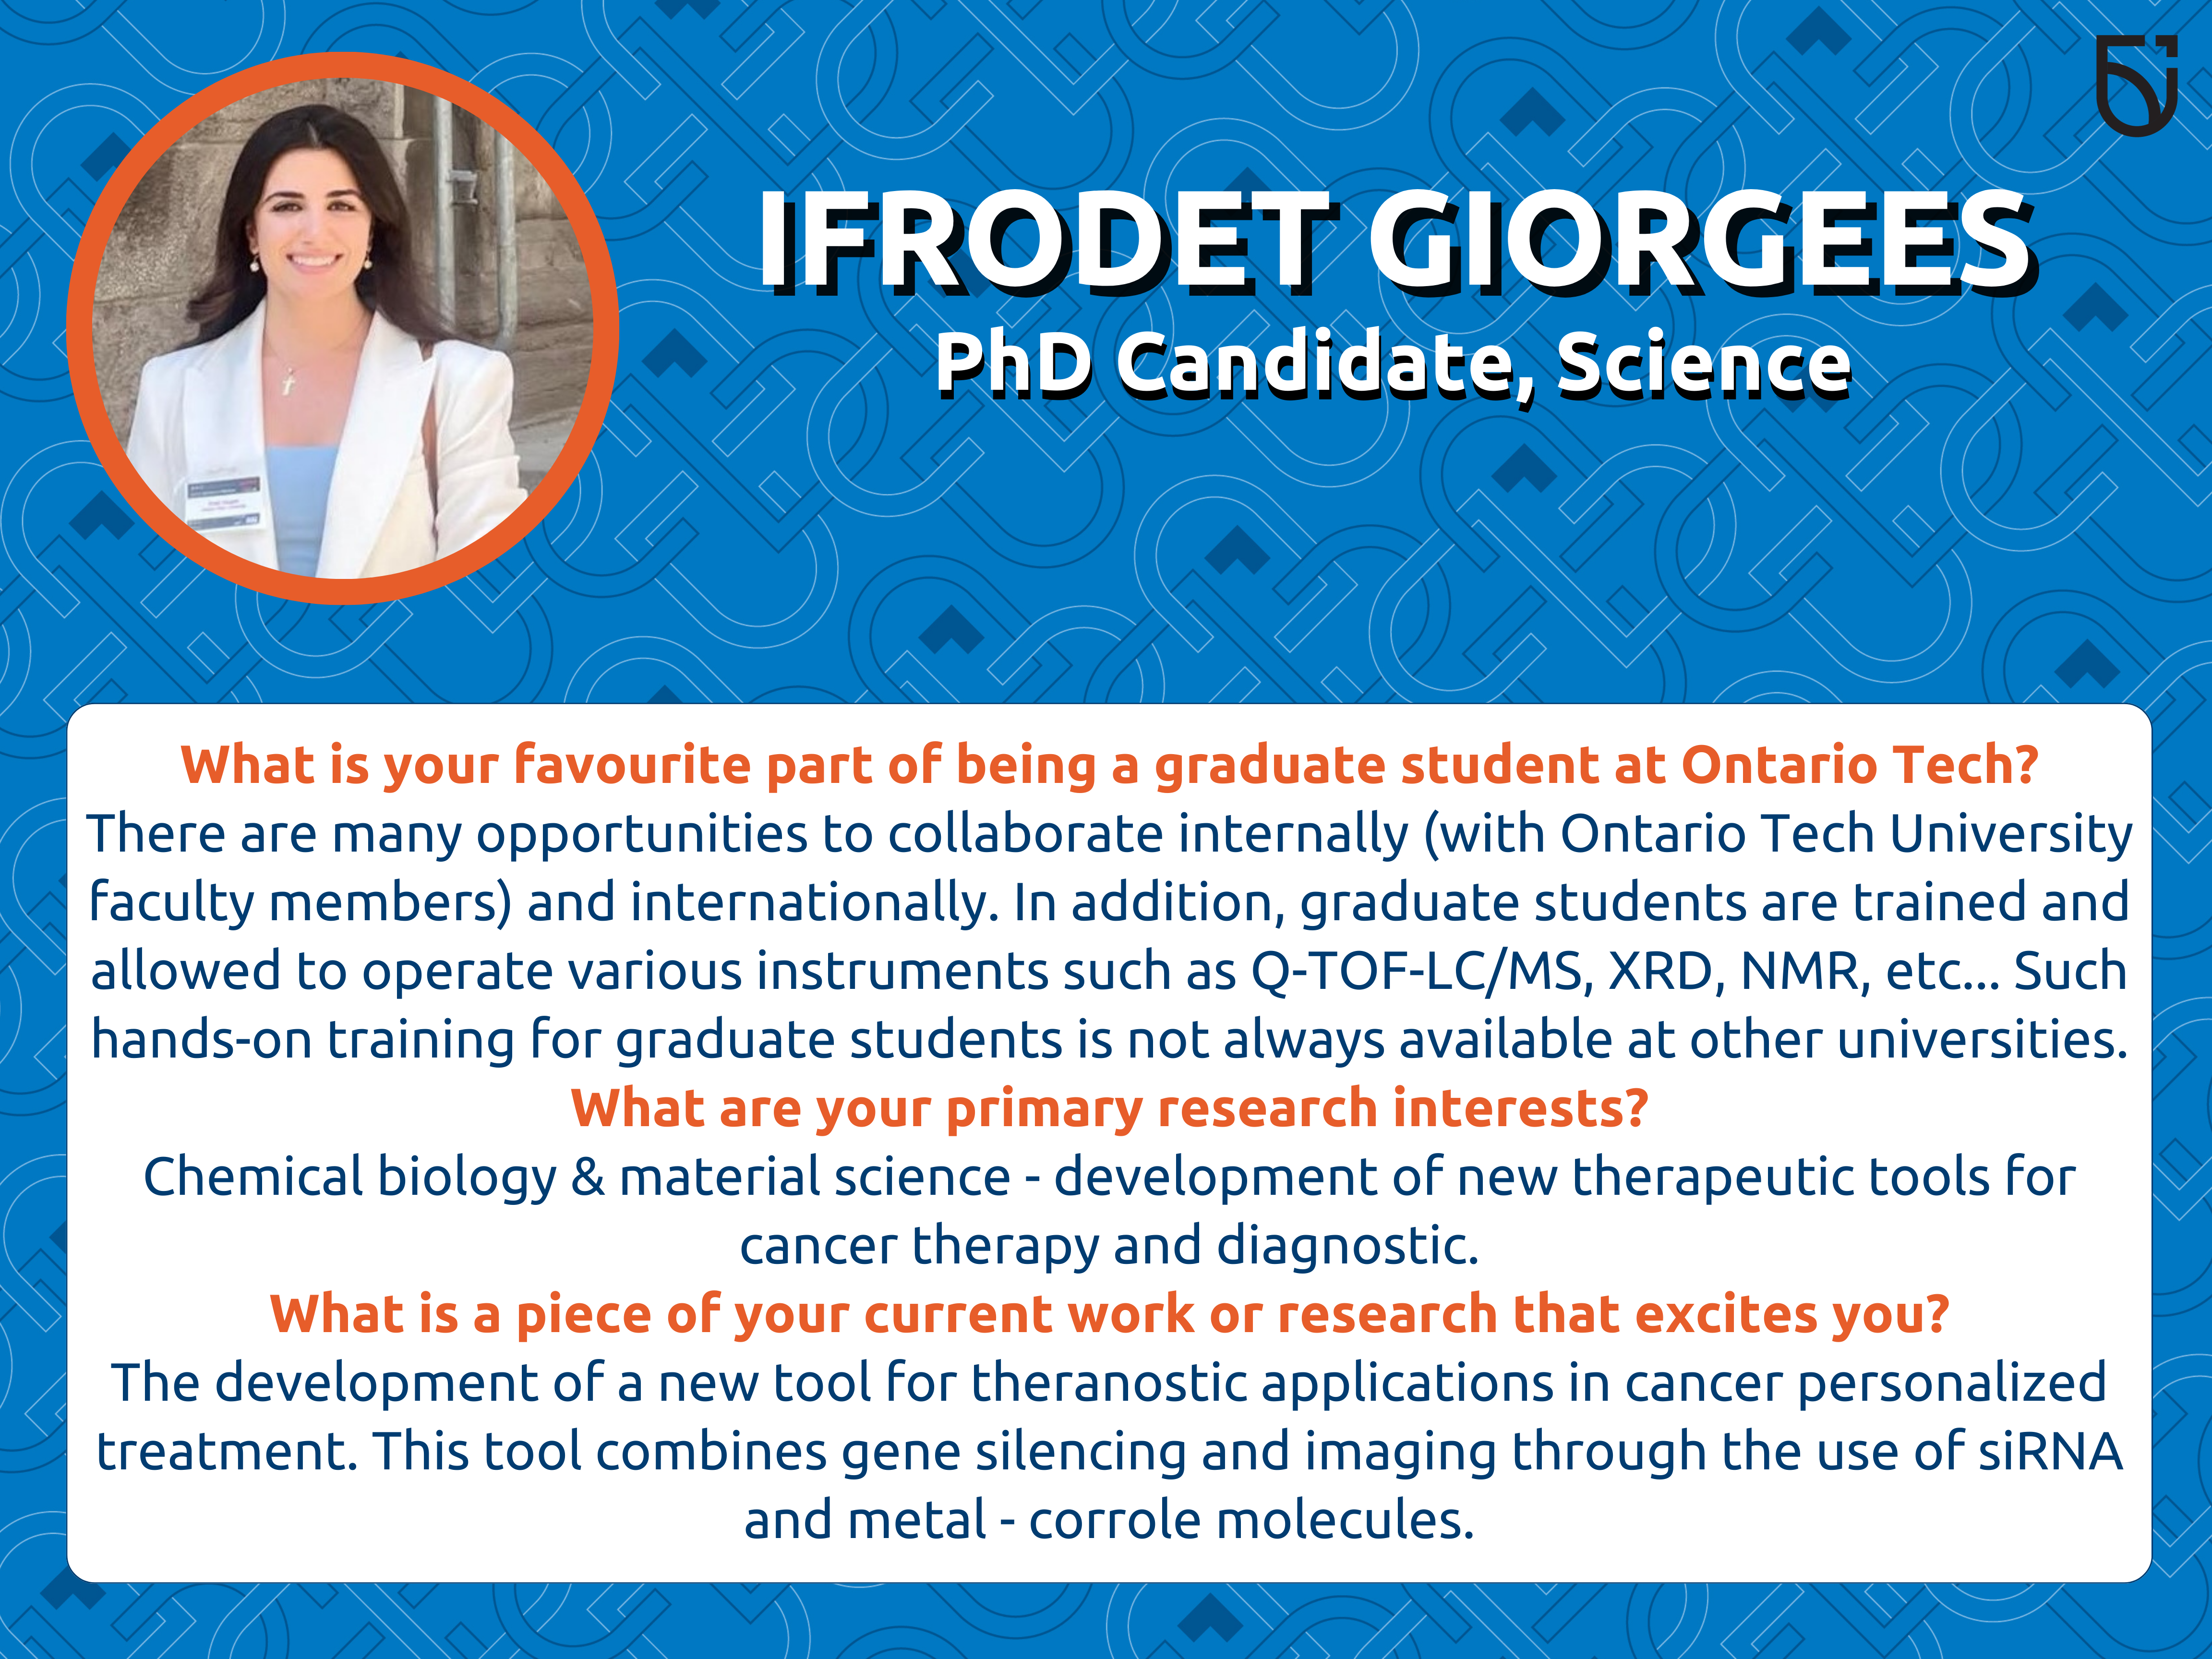 This photo is a Women’s Wednesday feature of Ifrodet Giorgees, a PhD Candidate in the Faculty of Science